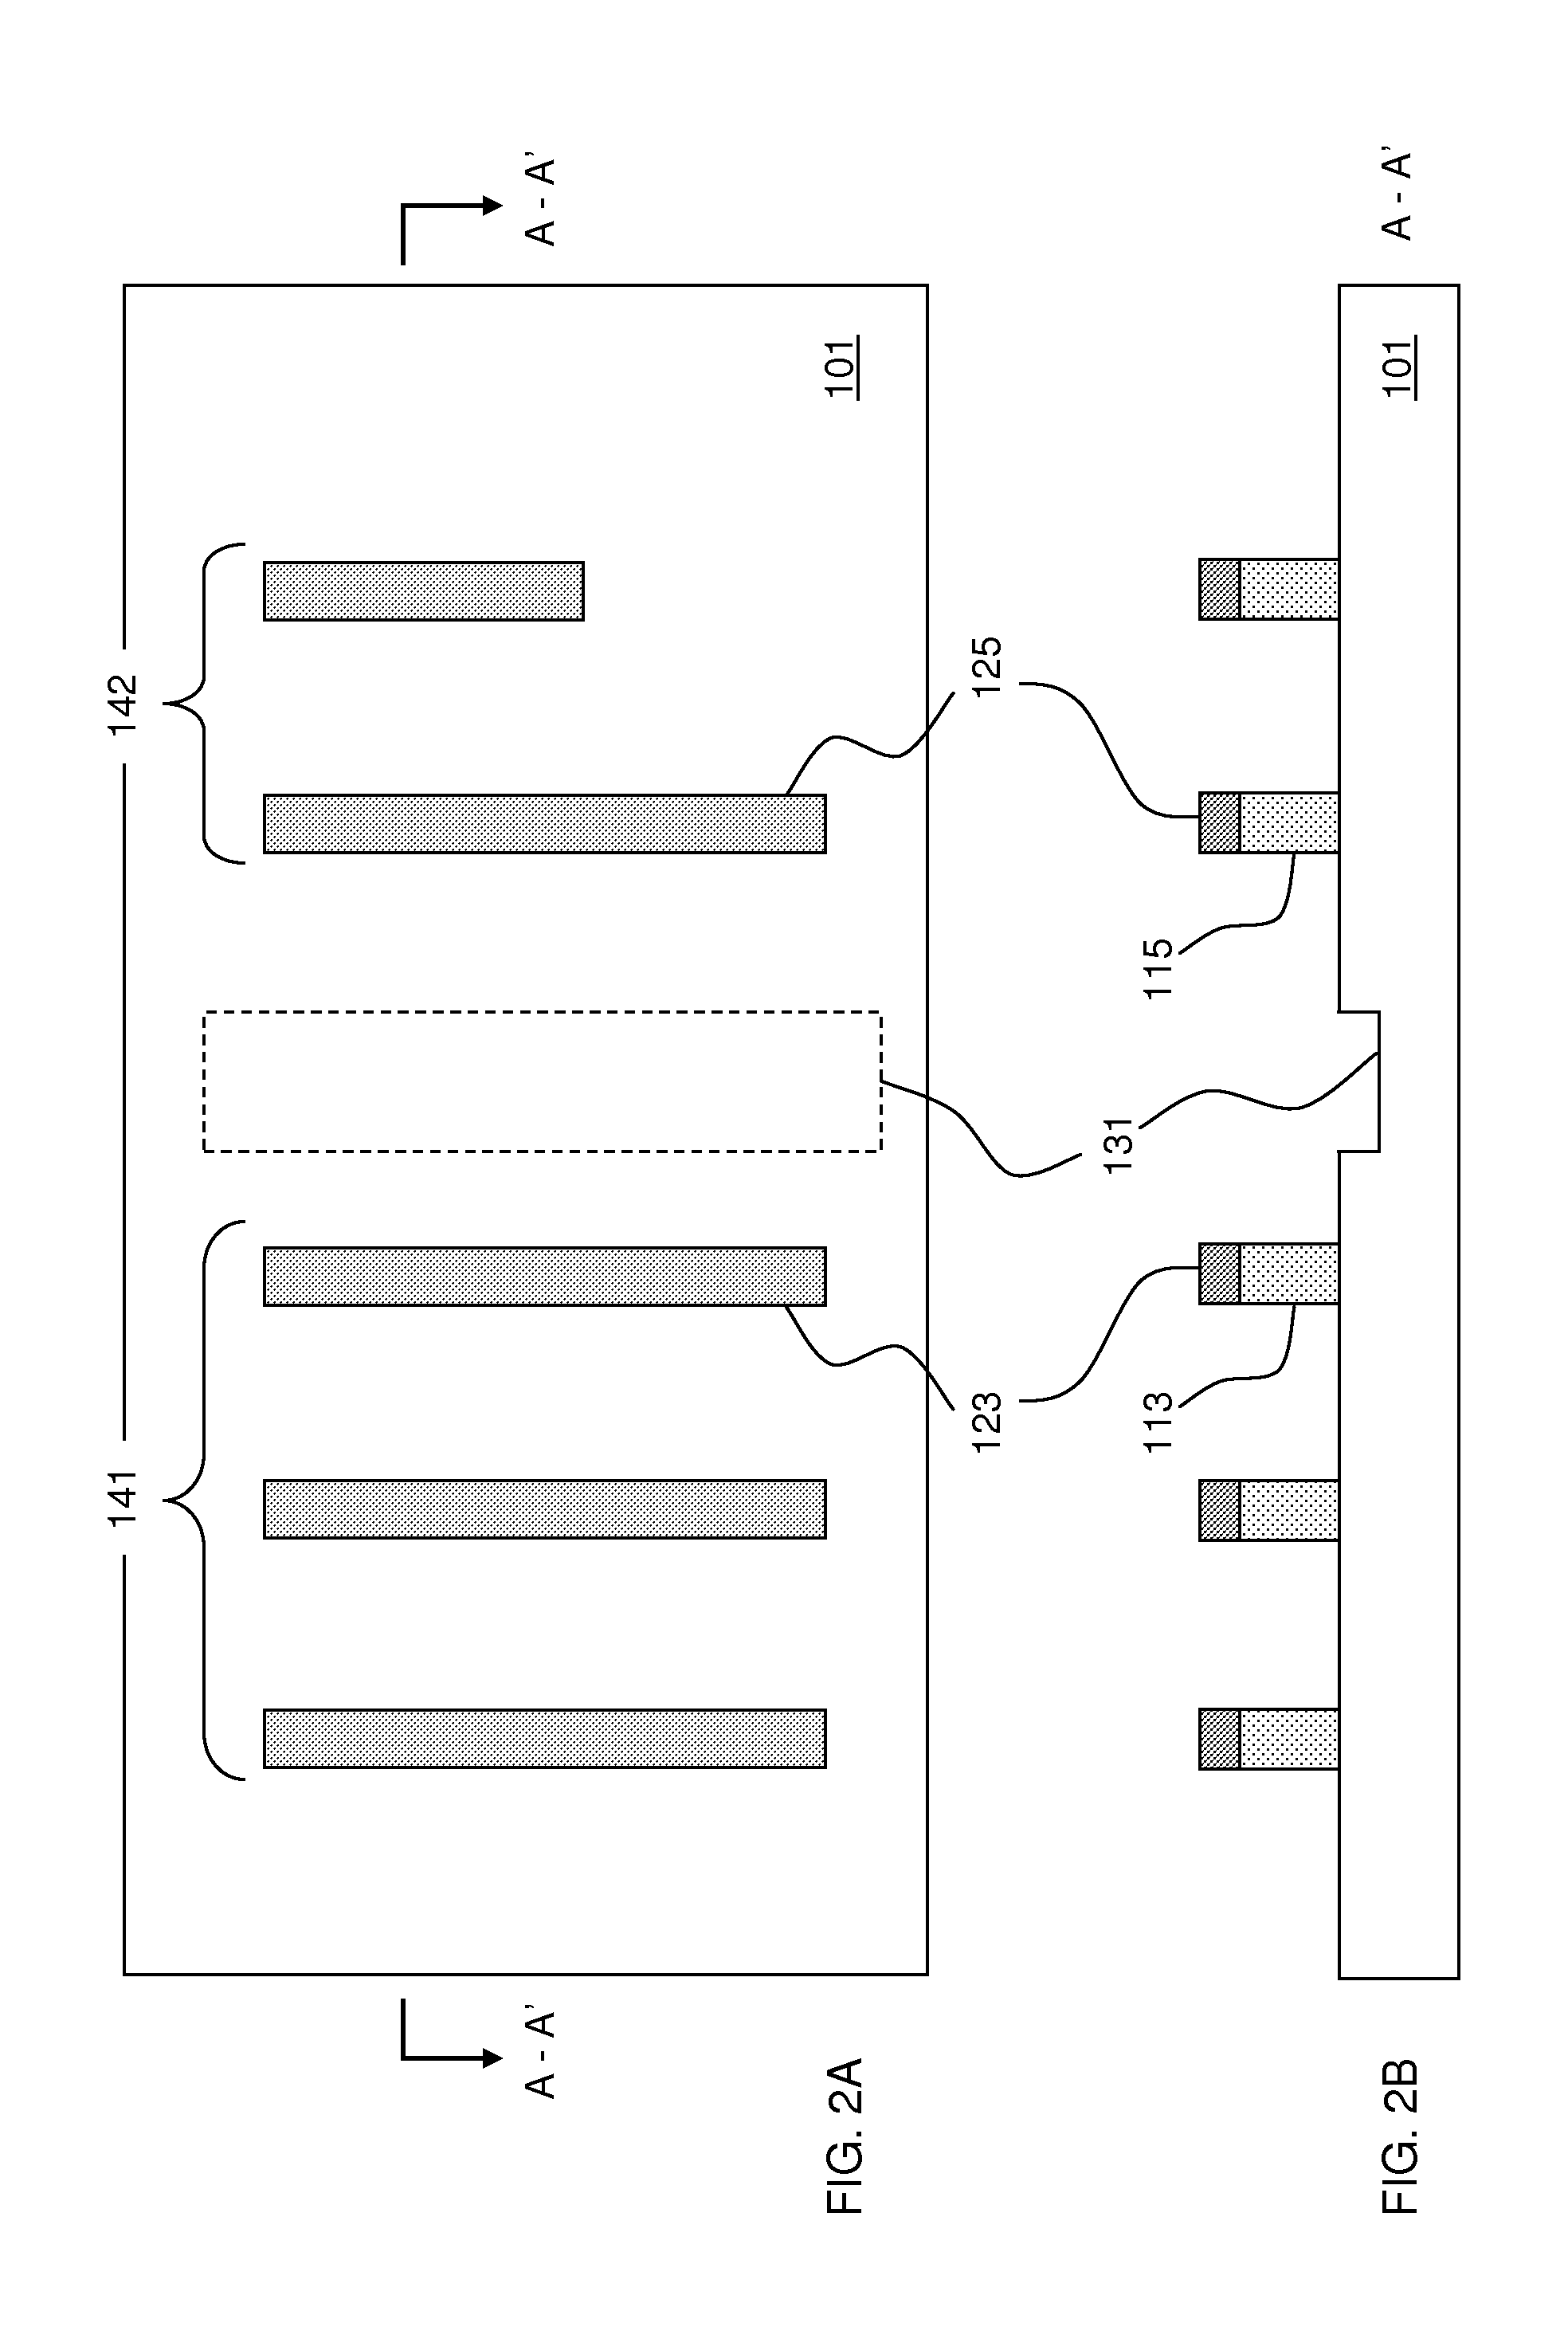 Self-aligned dielectric isolation for finfet devices